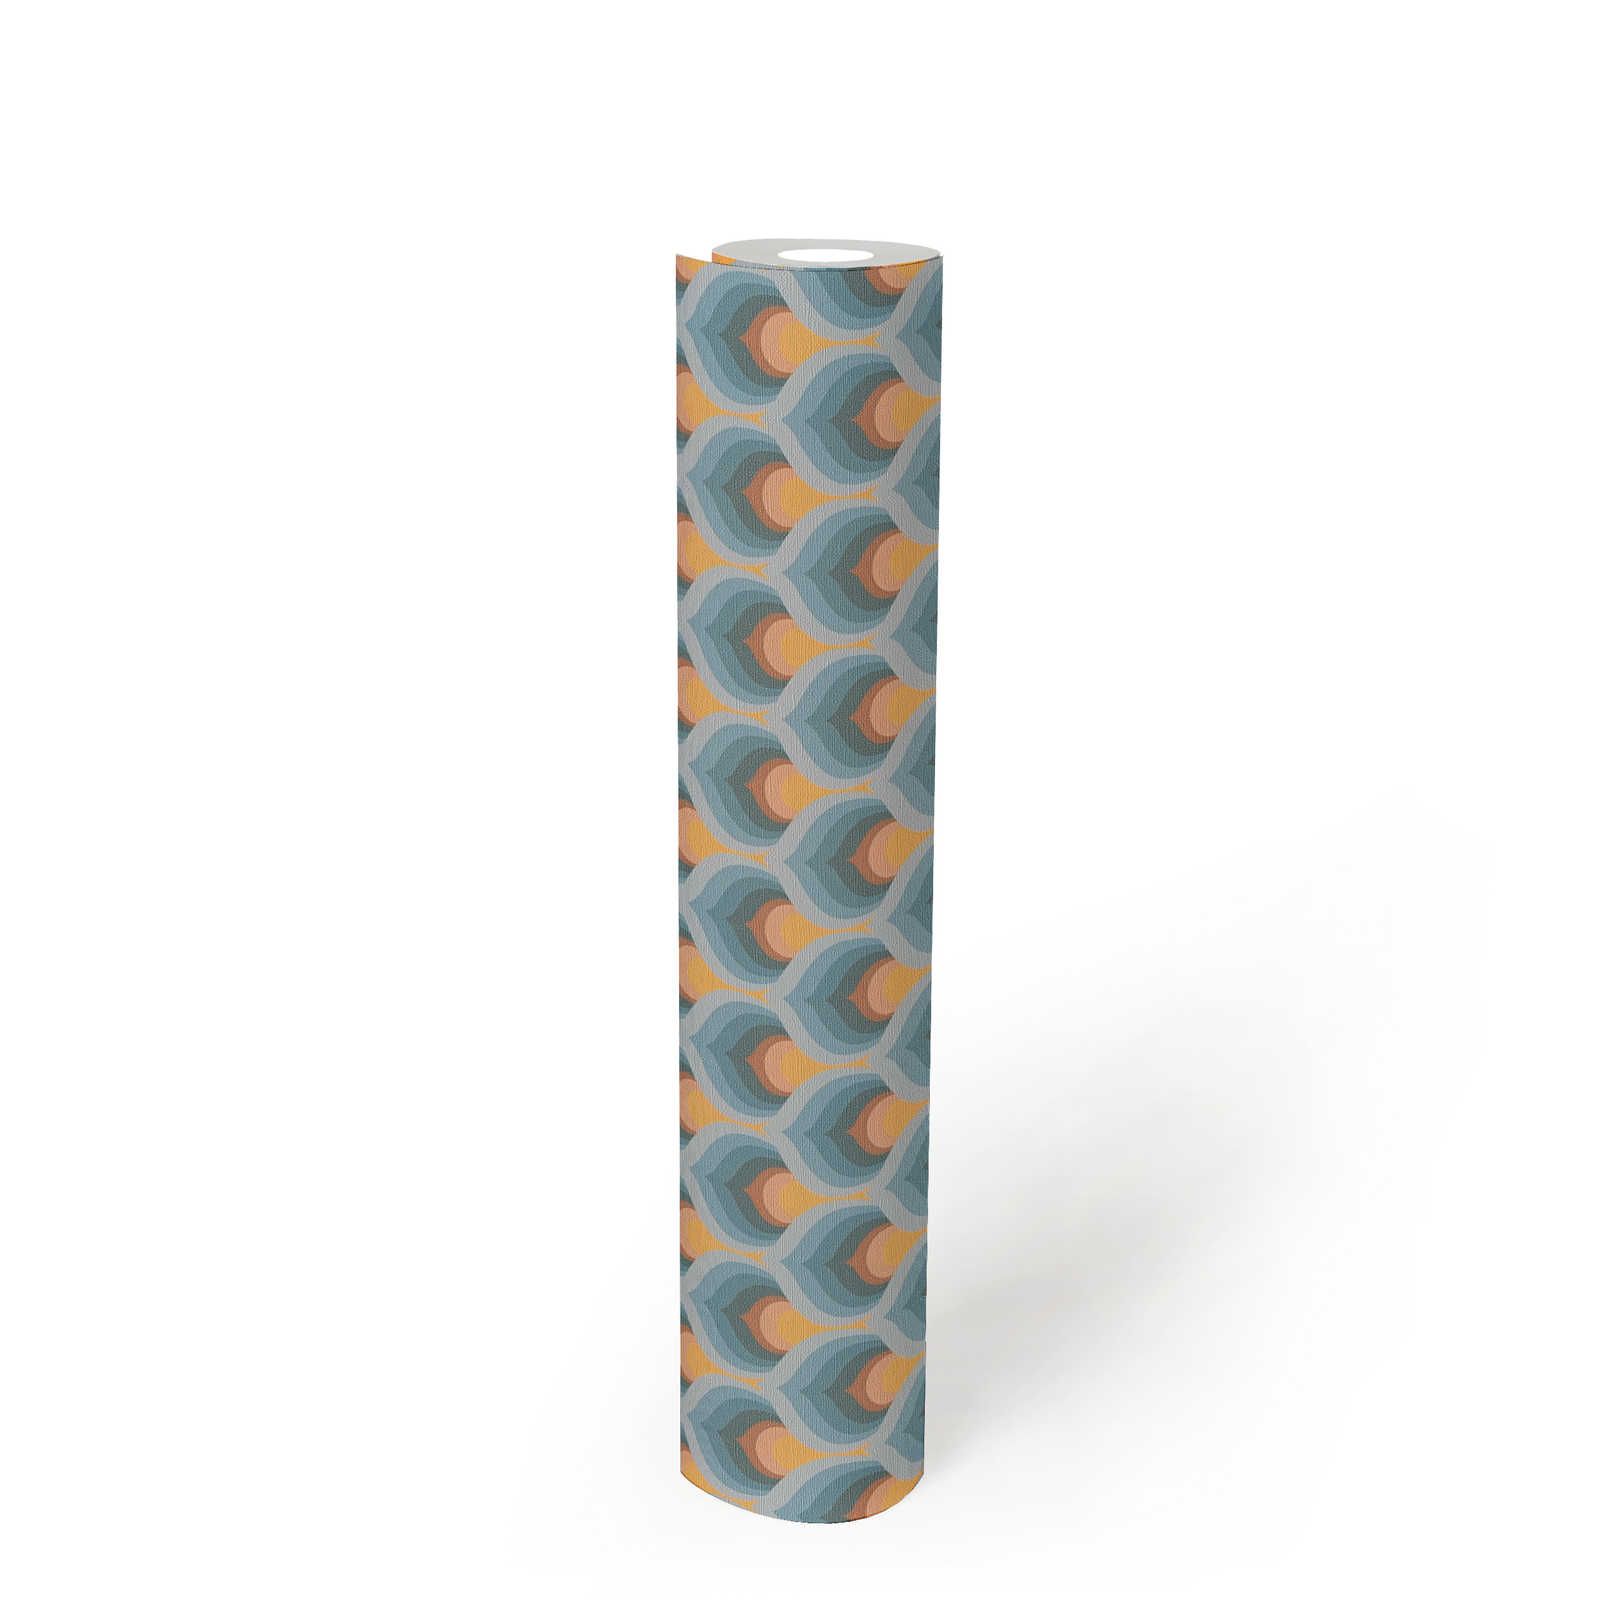             Non-woven wallpaper with retro scale pattern - blue, brown, yellow
        